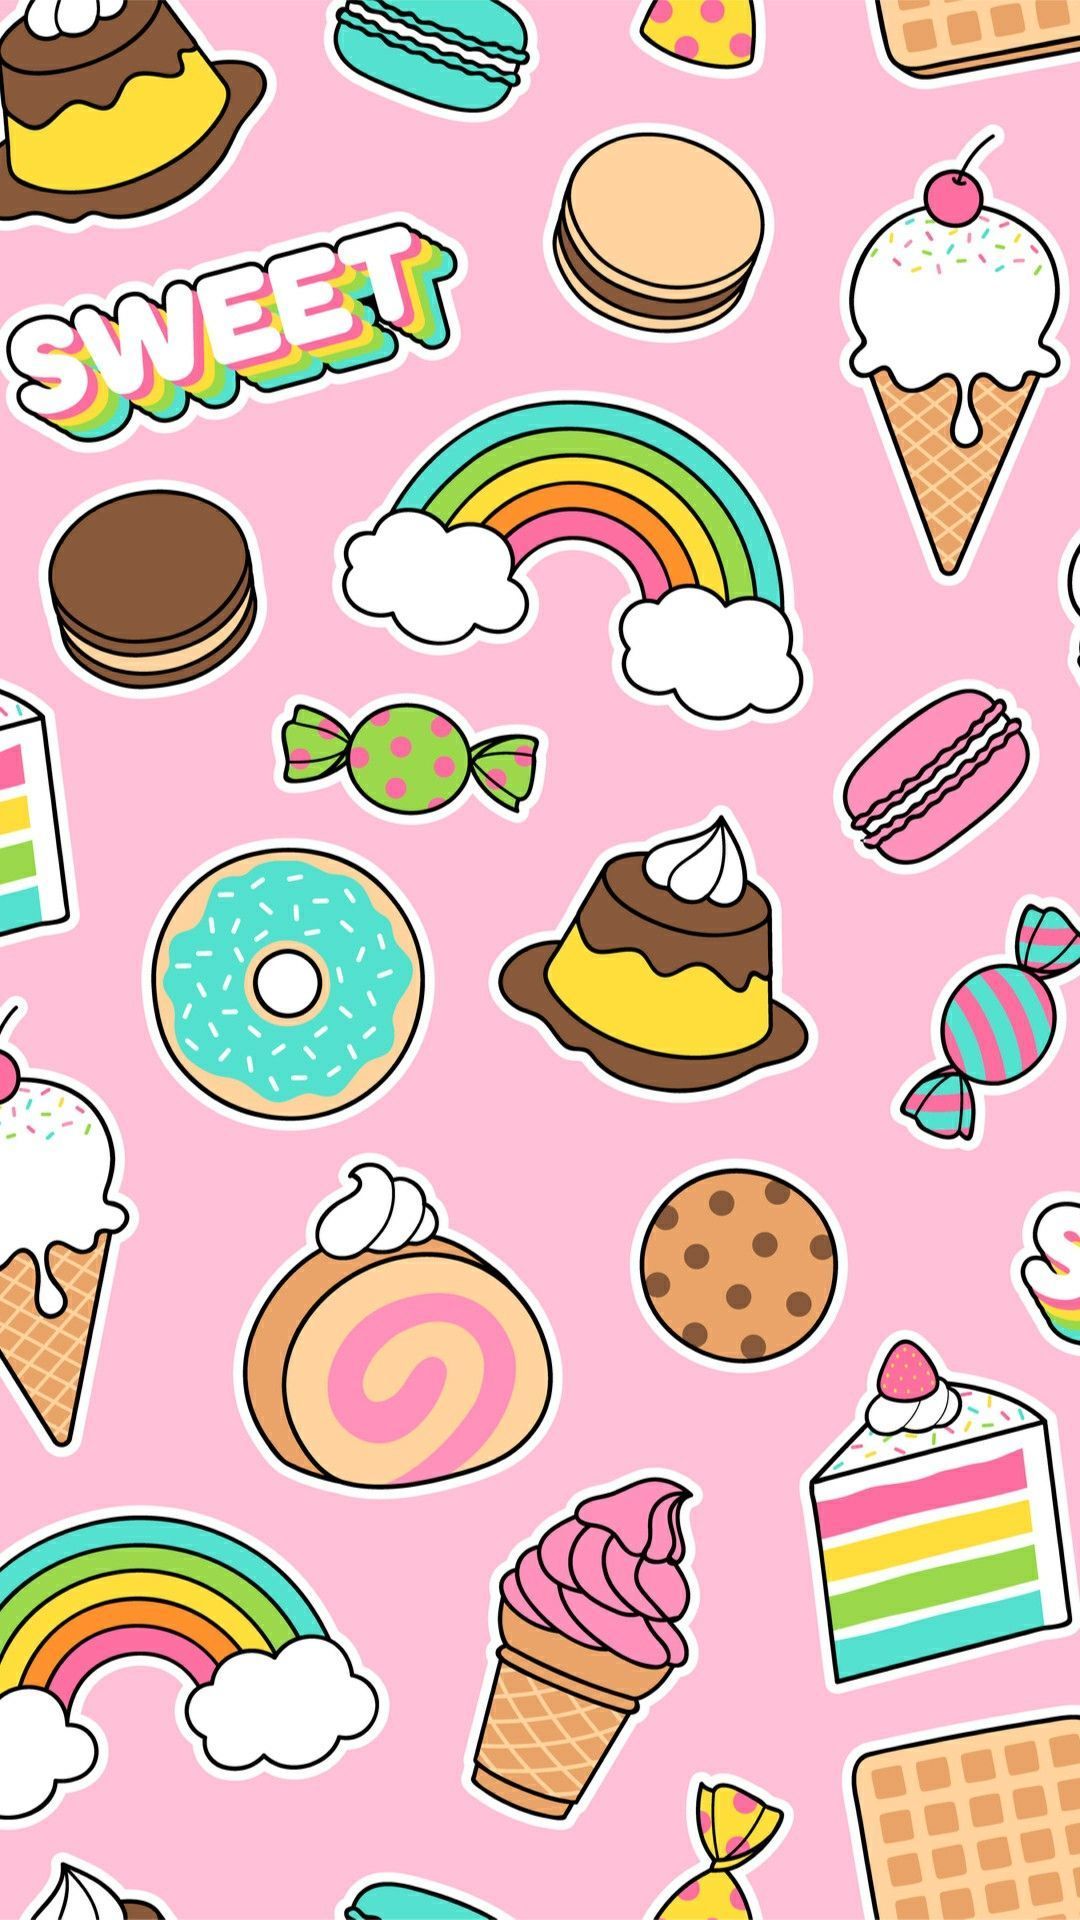 Cute Food Wallpaper iPhone Background Hupages Download iPhone Wallpaper. Cute food wallpaper, Cupcakes wallpaper, Wallpaper iphone cute